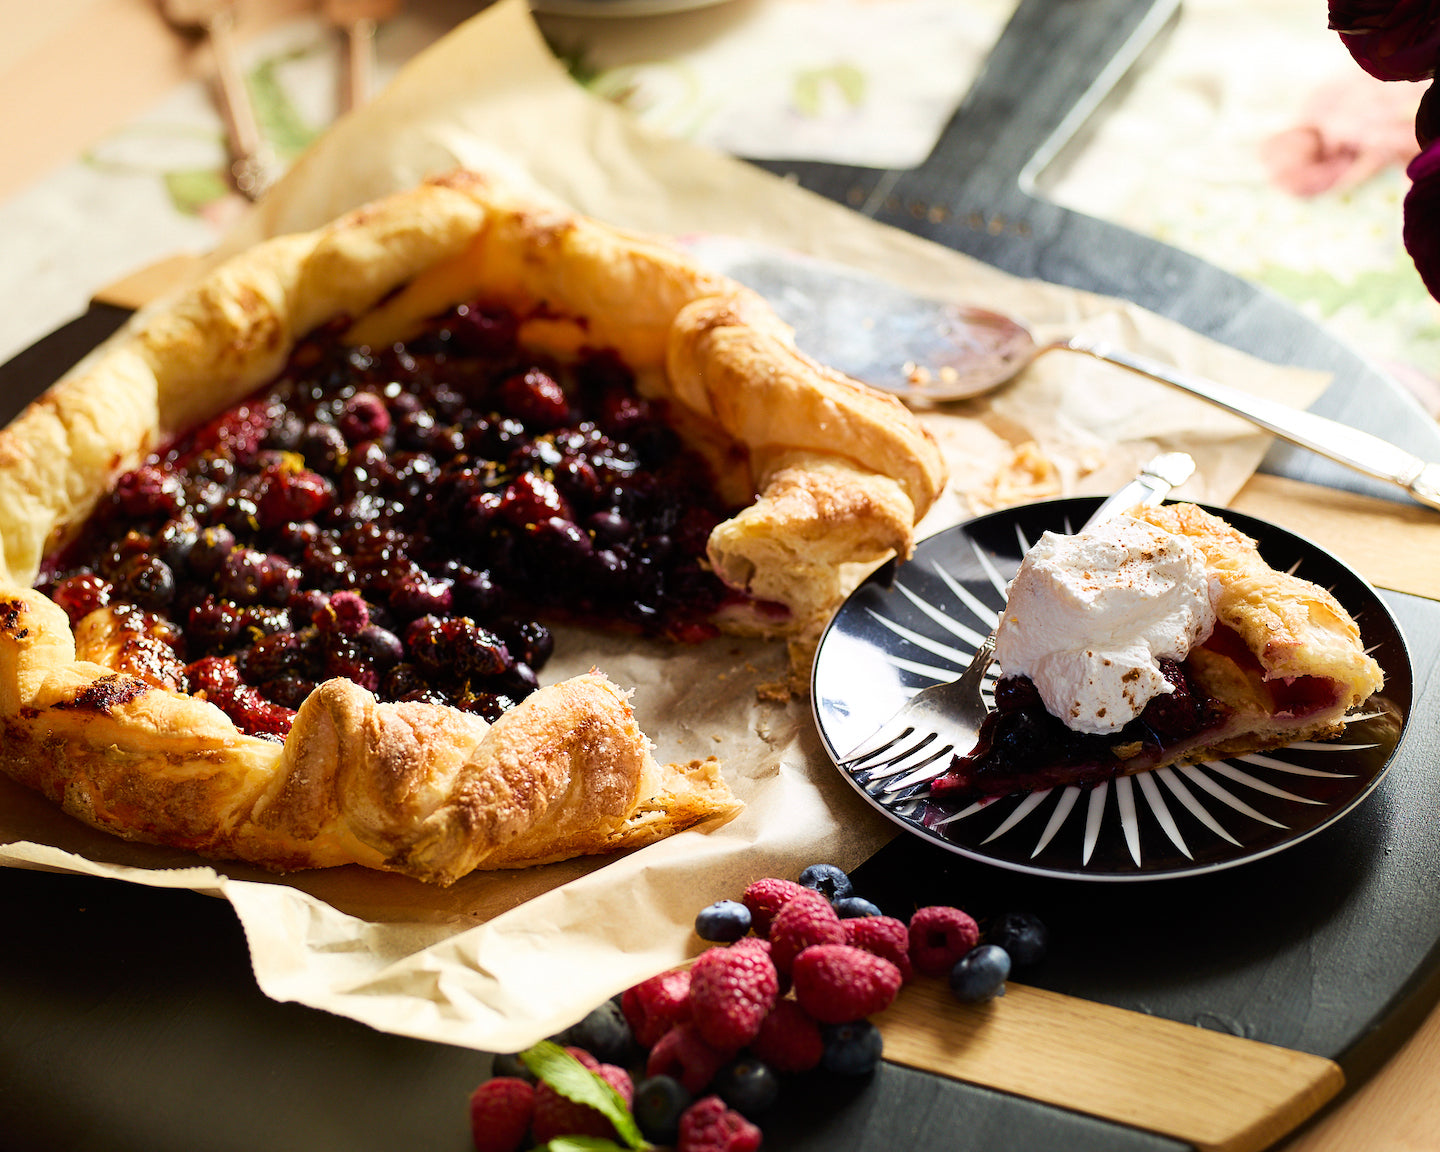 A blueberry crostata on a sheet of parchment paper next to a small Marrakech plate with a slice of the dessert topped with whipped cream.